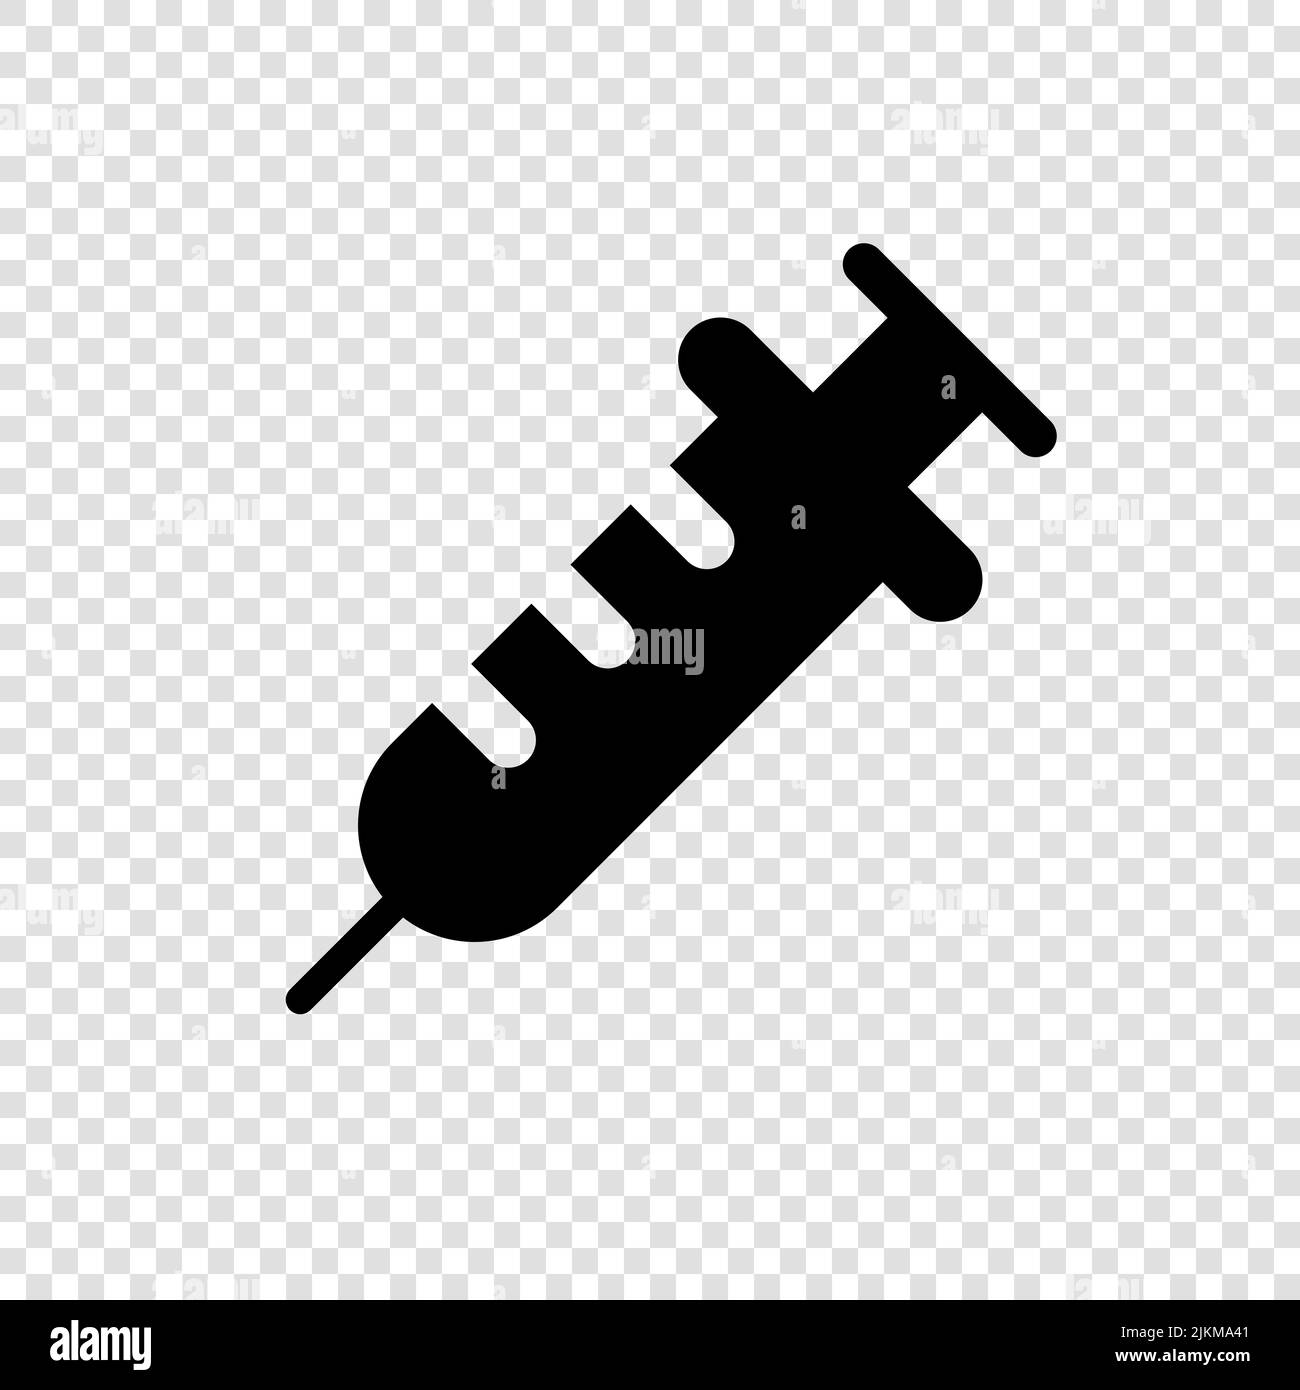 Syringe silhouette icon. Injection icon. Editable vector. Stock Vector